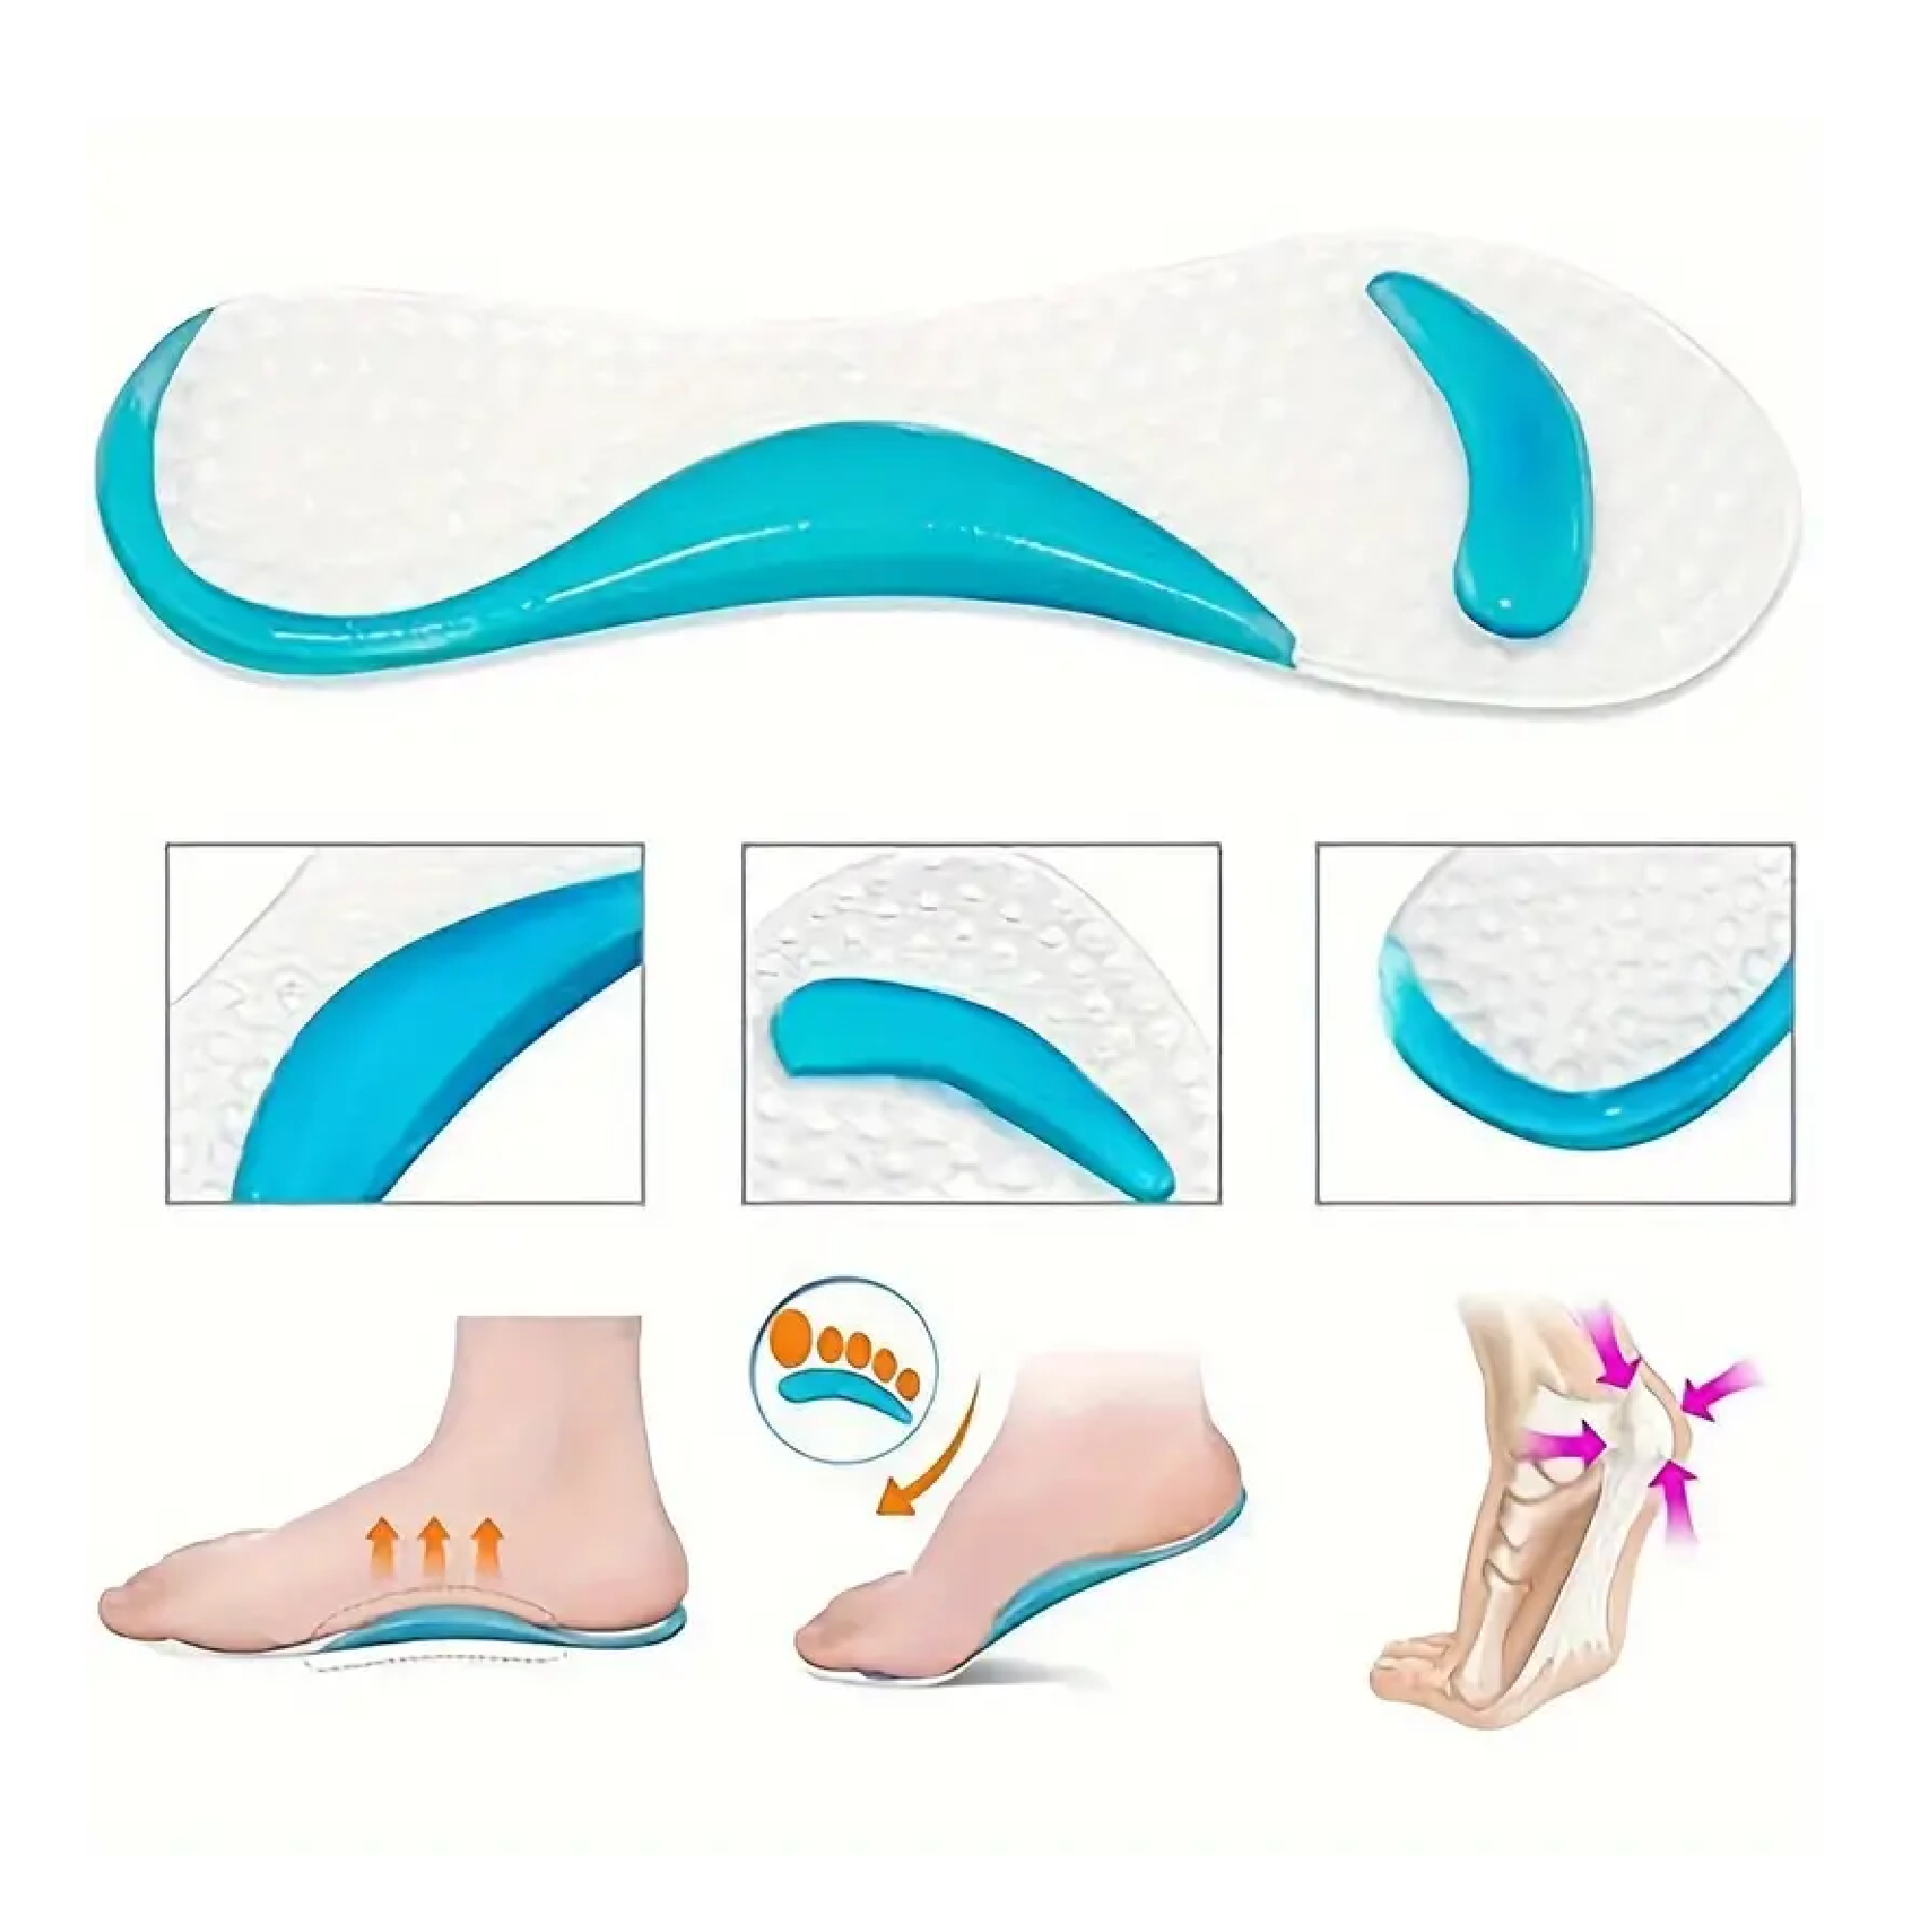 1 Pair Arch Support Pads For High Heels - Non-Slip Massage Adjustable Insoles, Women's Flat Foot Arch Support Pads